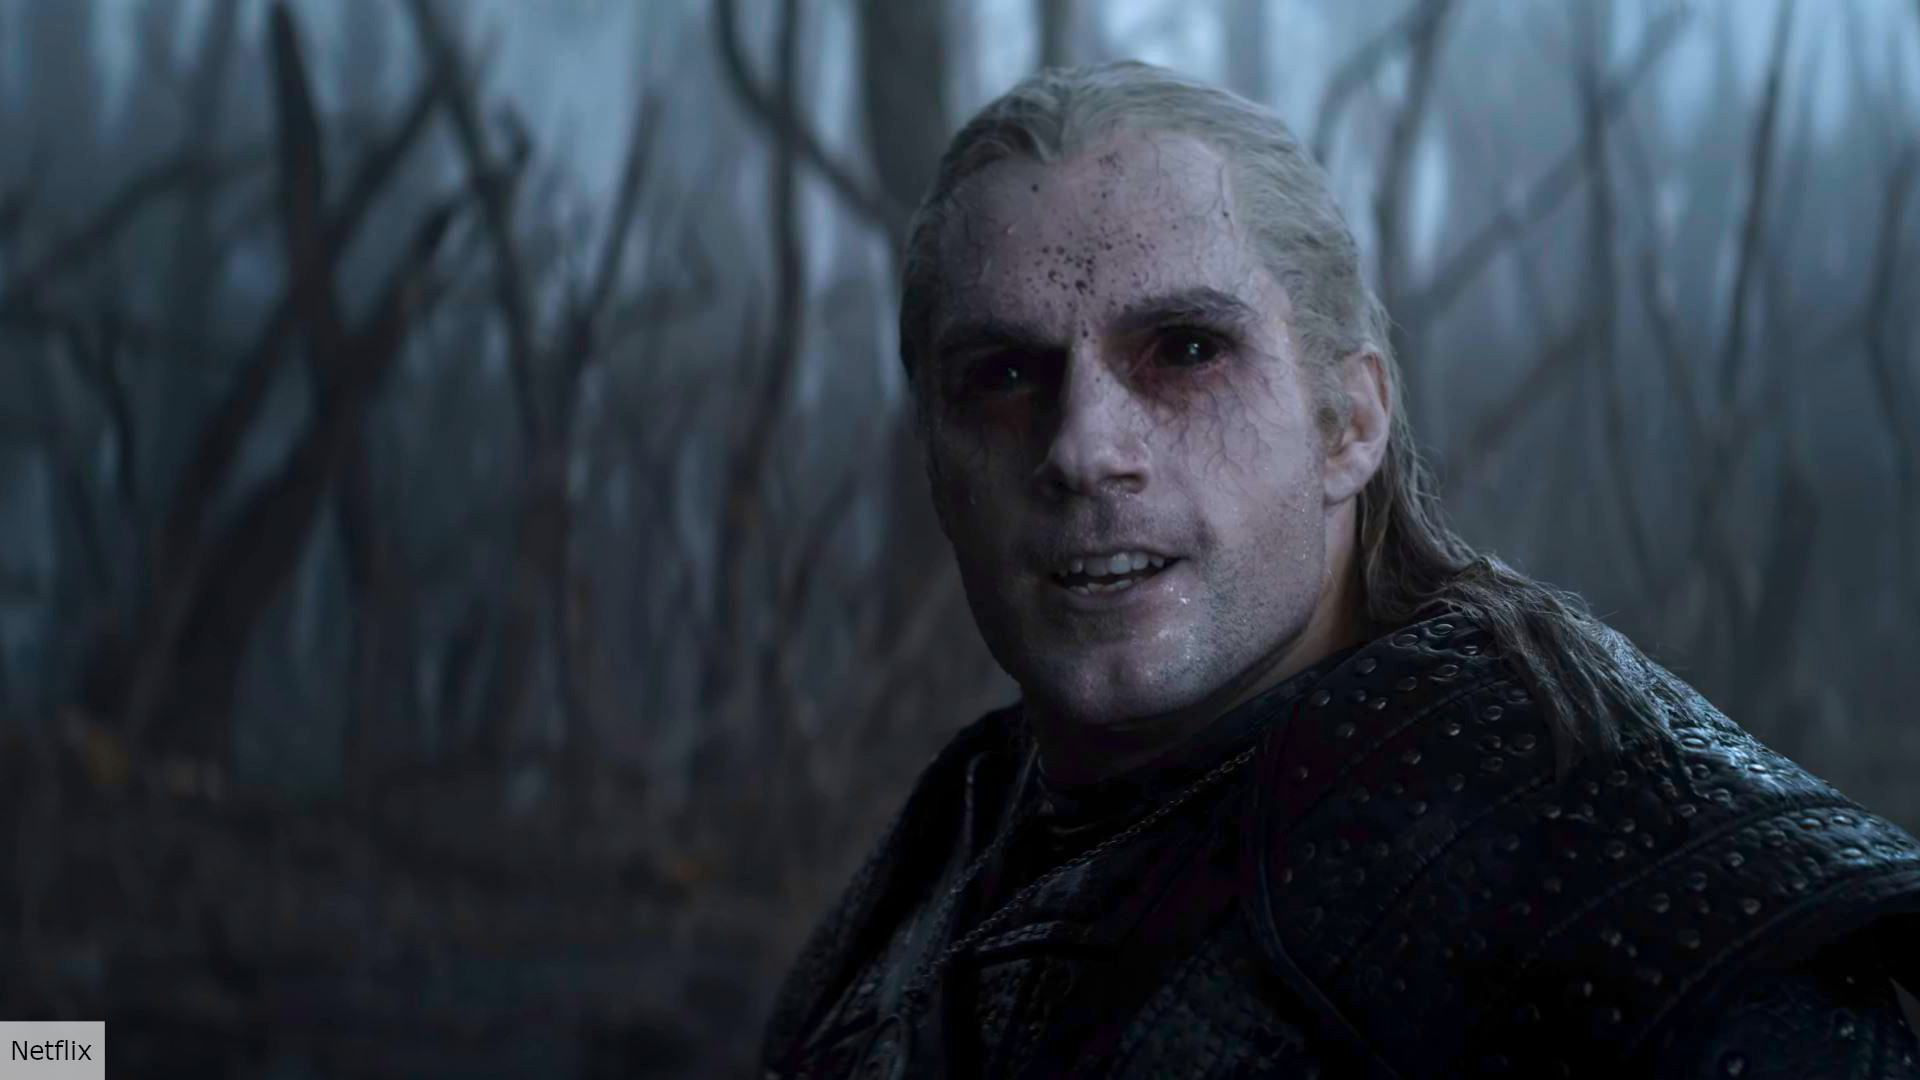 Why do Geralt’s eyes turn black in The Witcher?